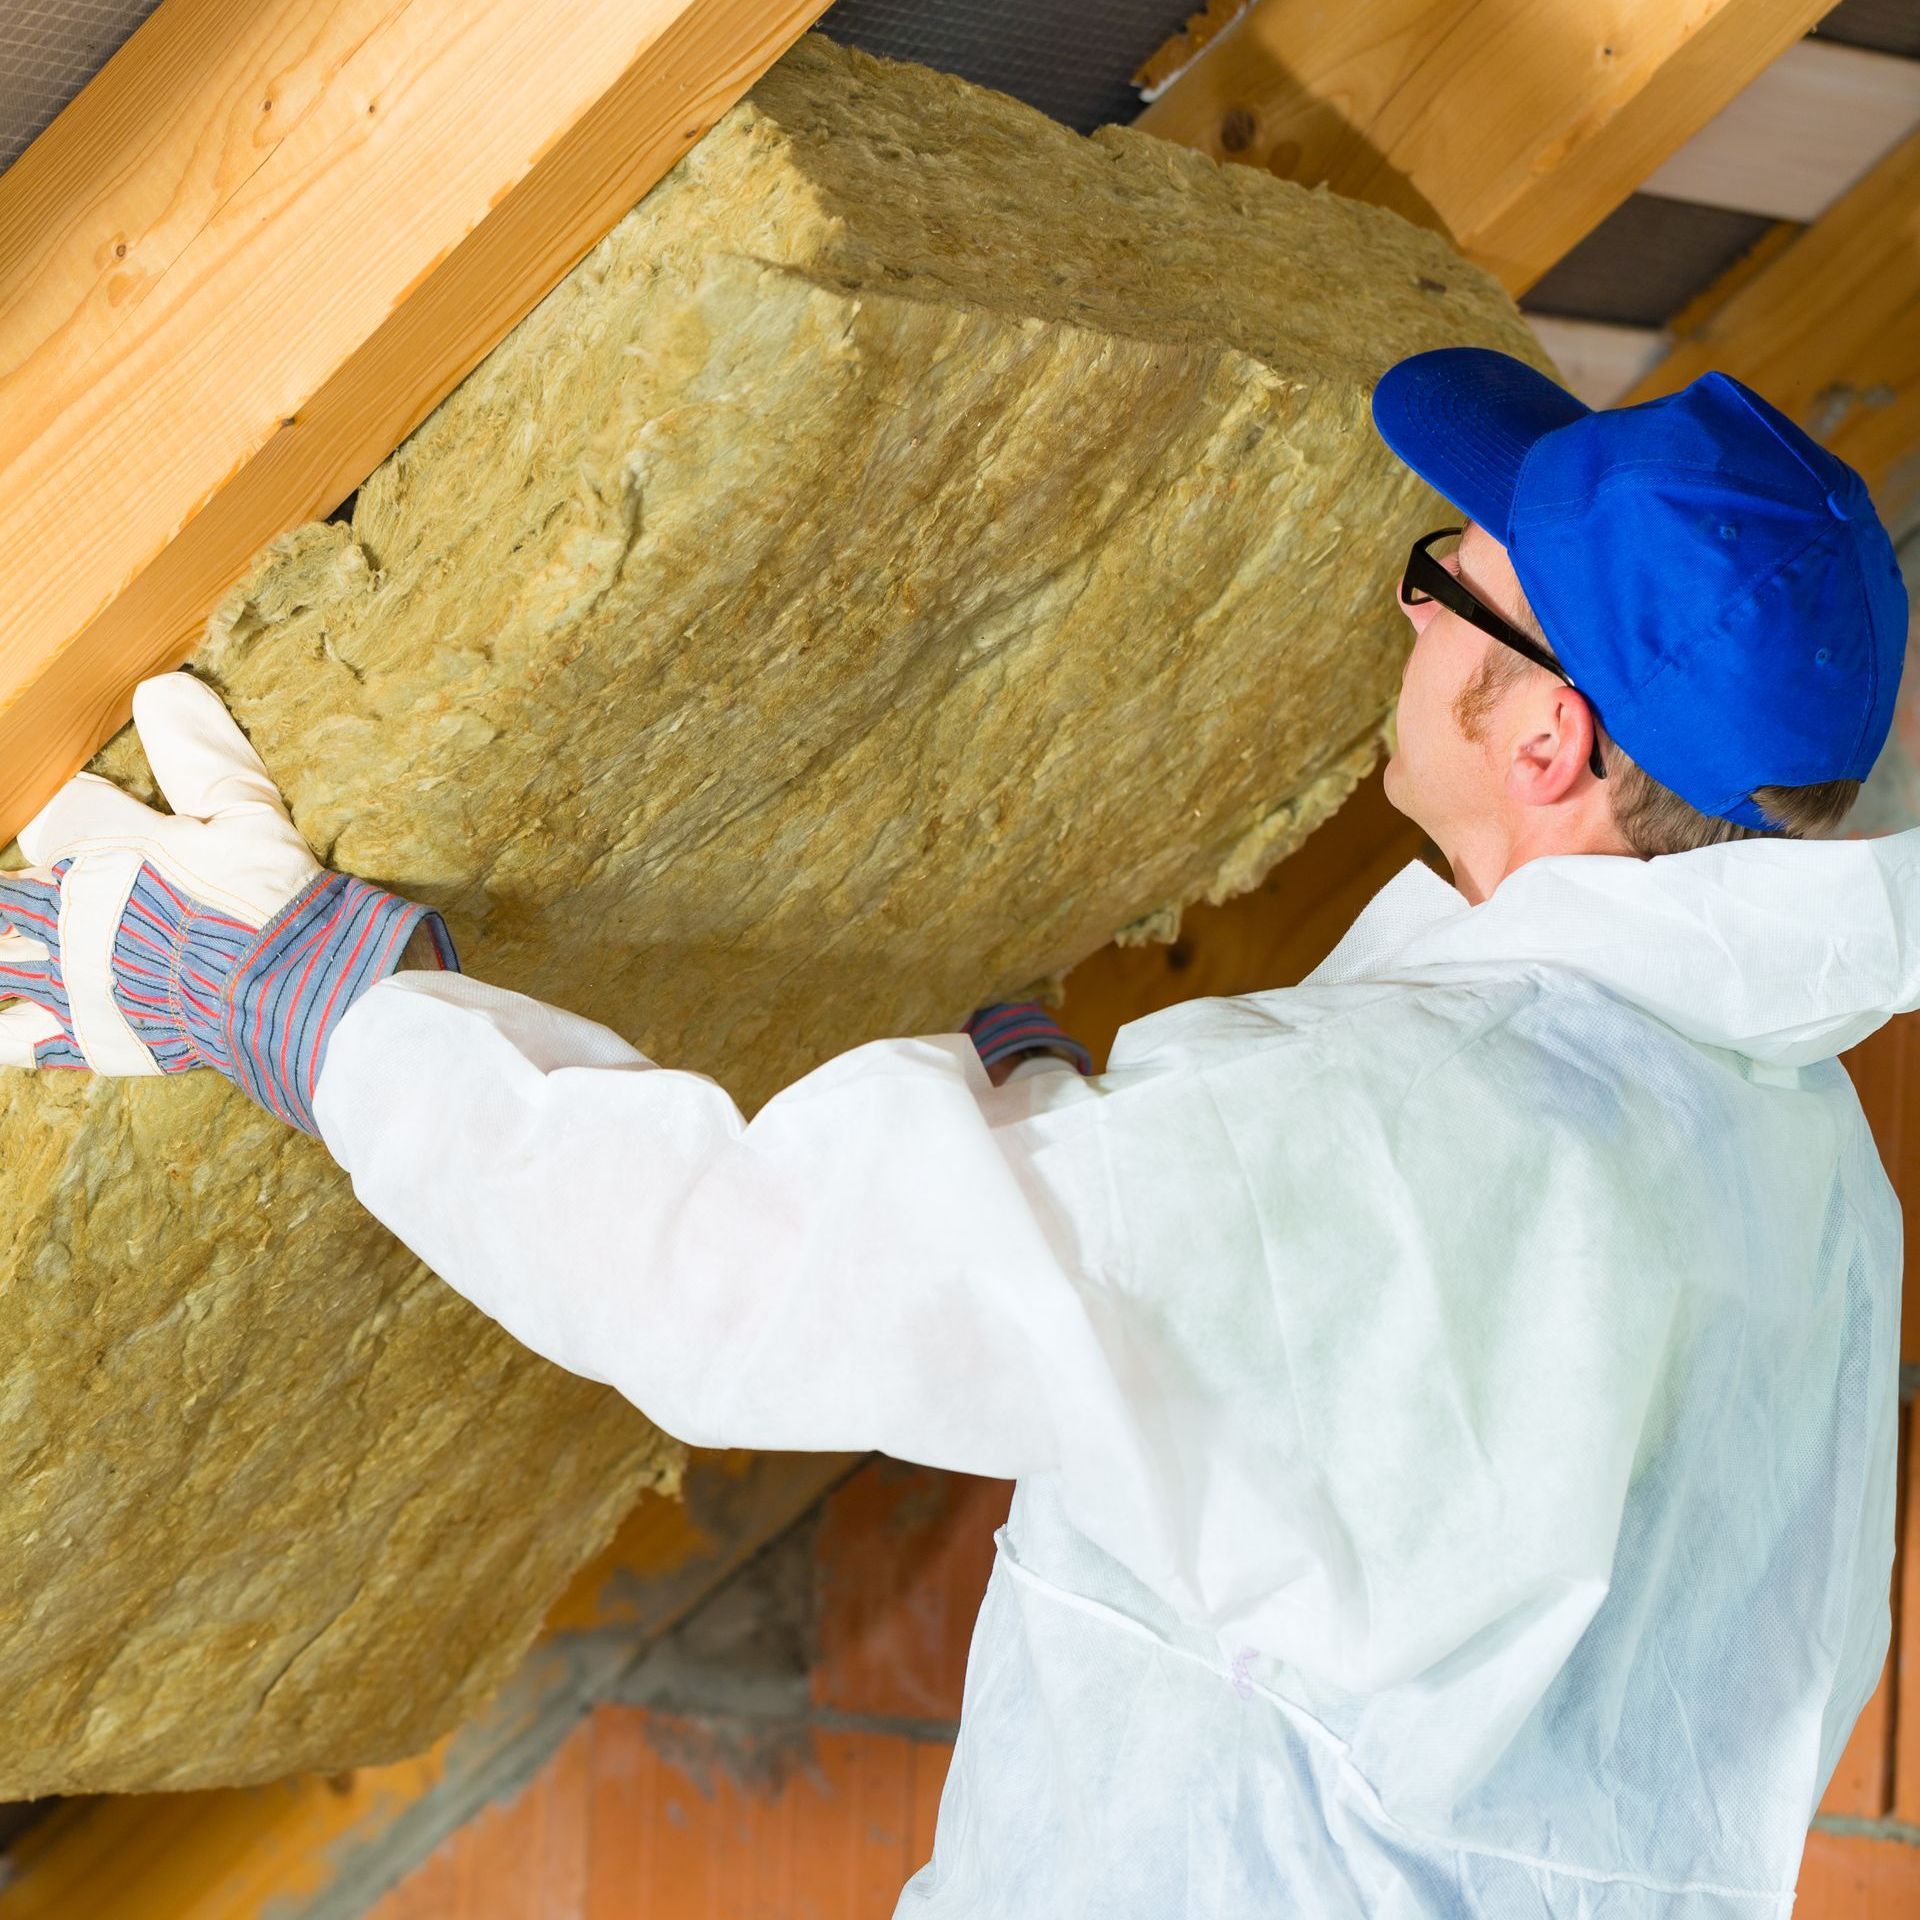 Setting thermal insulation material